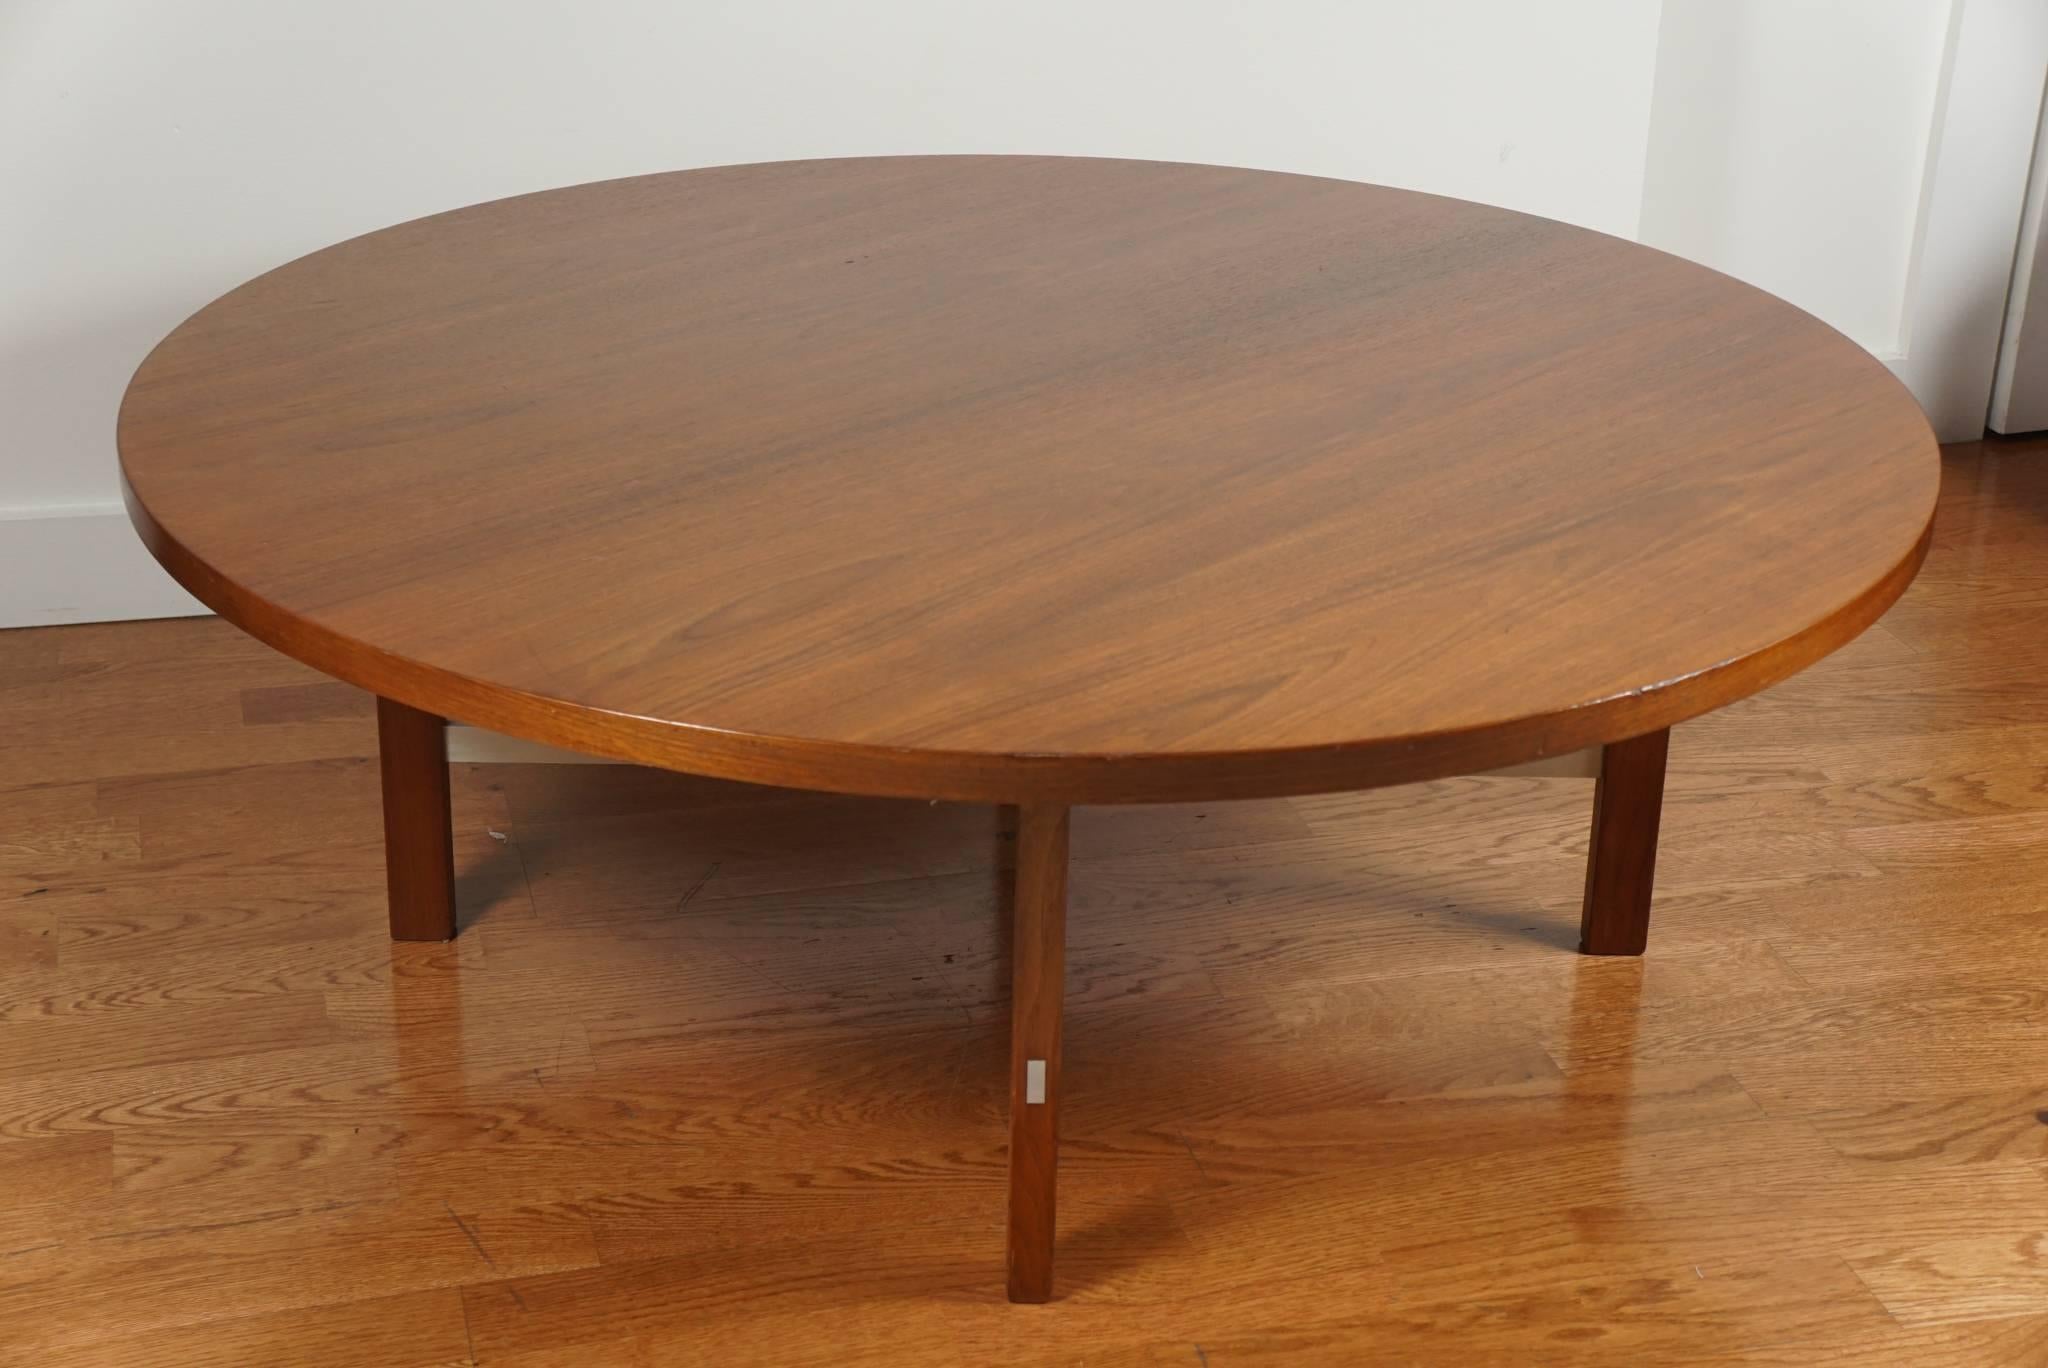 Handsome, round cocktail table, with brushed chrome accents. Newly refurbished.